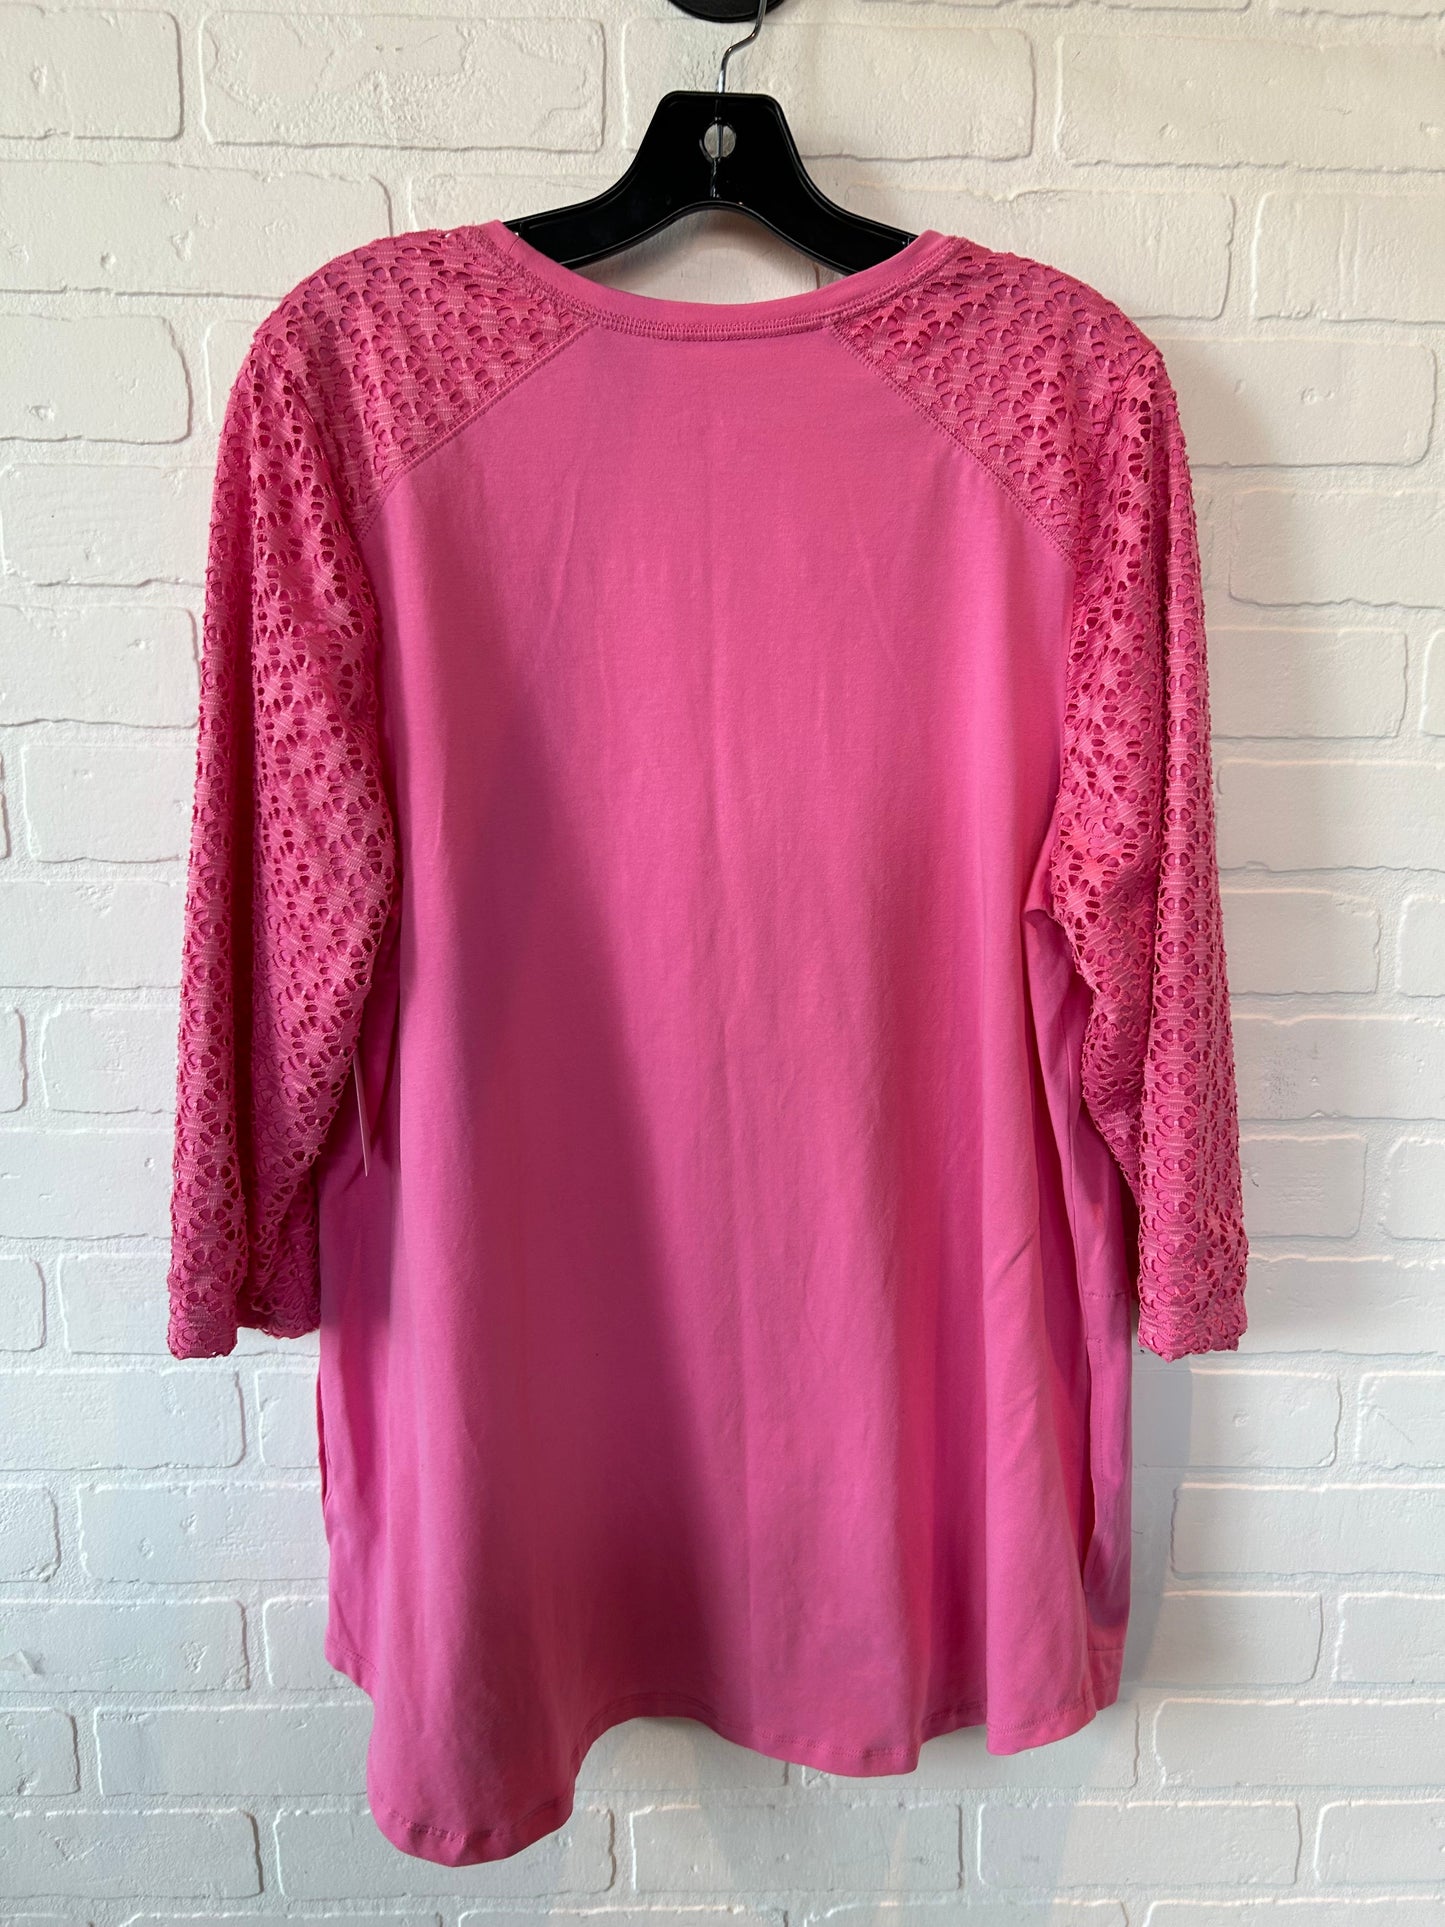 Pink Top 3/4 Sleeve Denim And Company, Size L